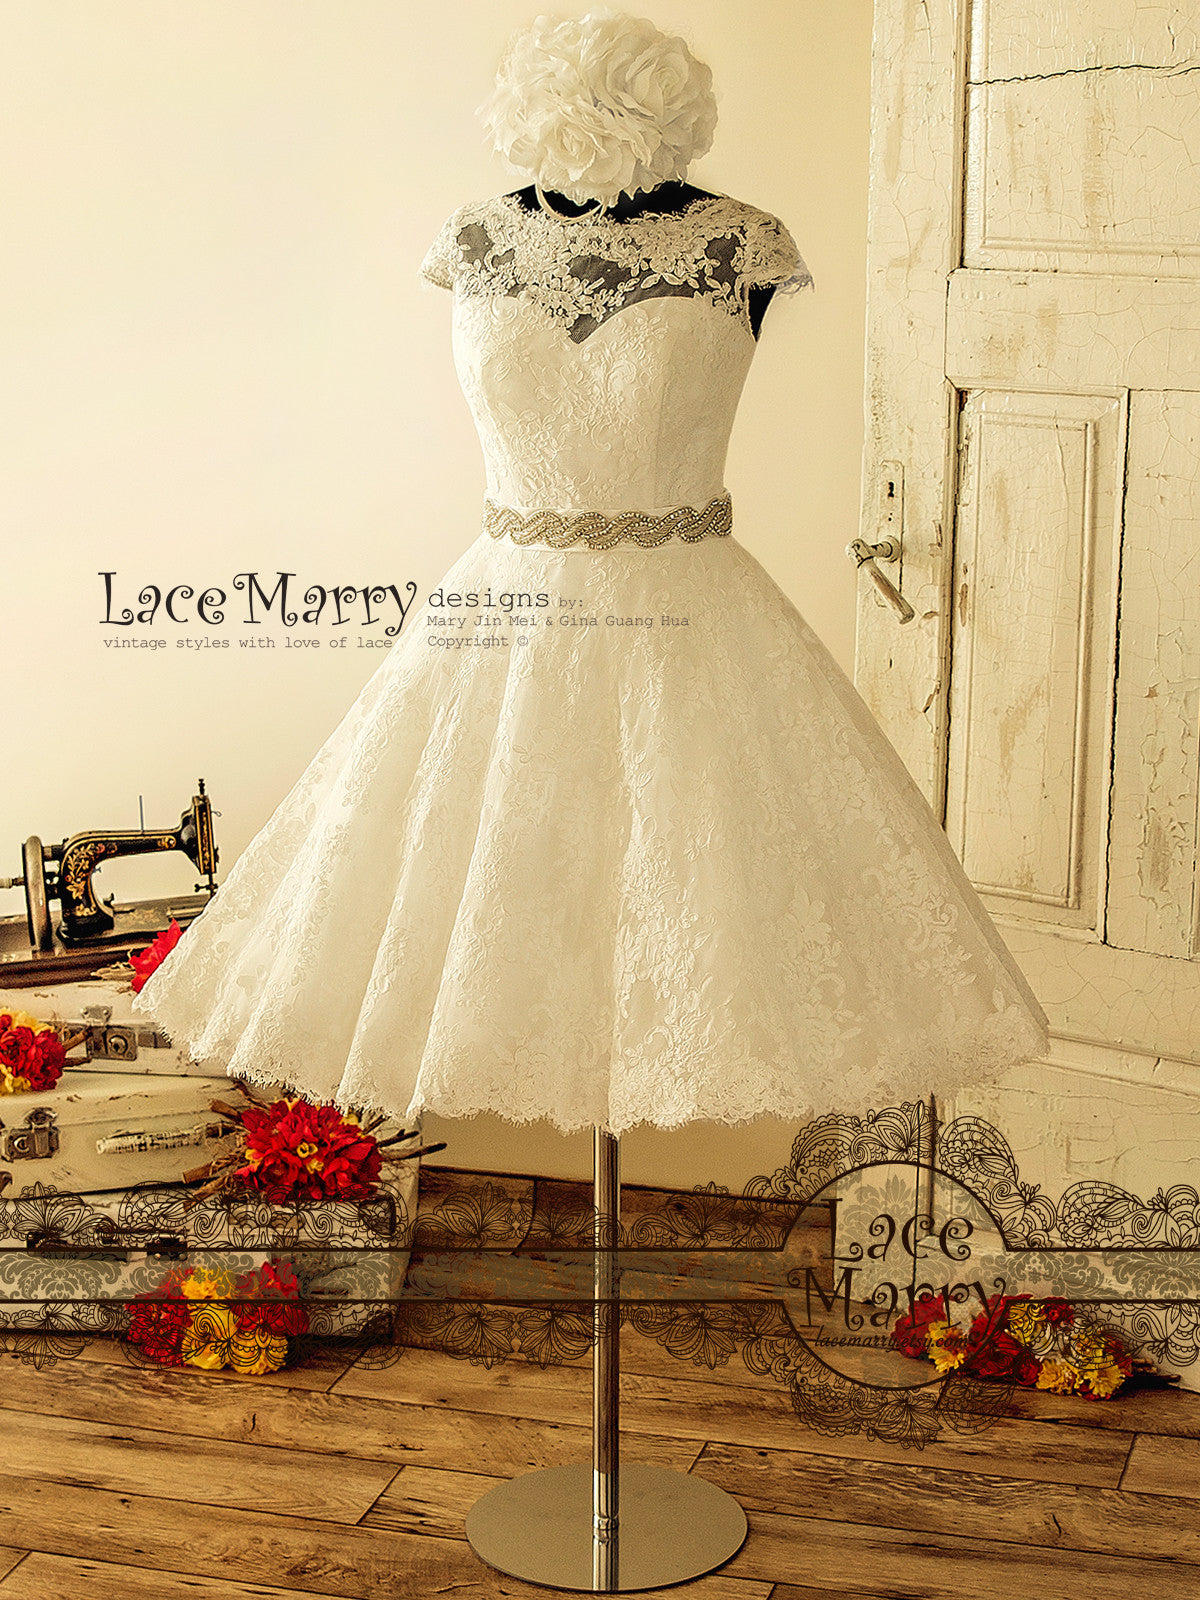 Rockabilly Inspired Wedding Dress from Lace in Knee Length - LaceMarry